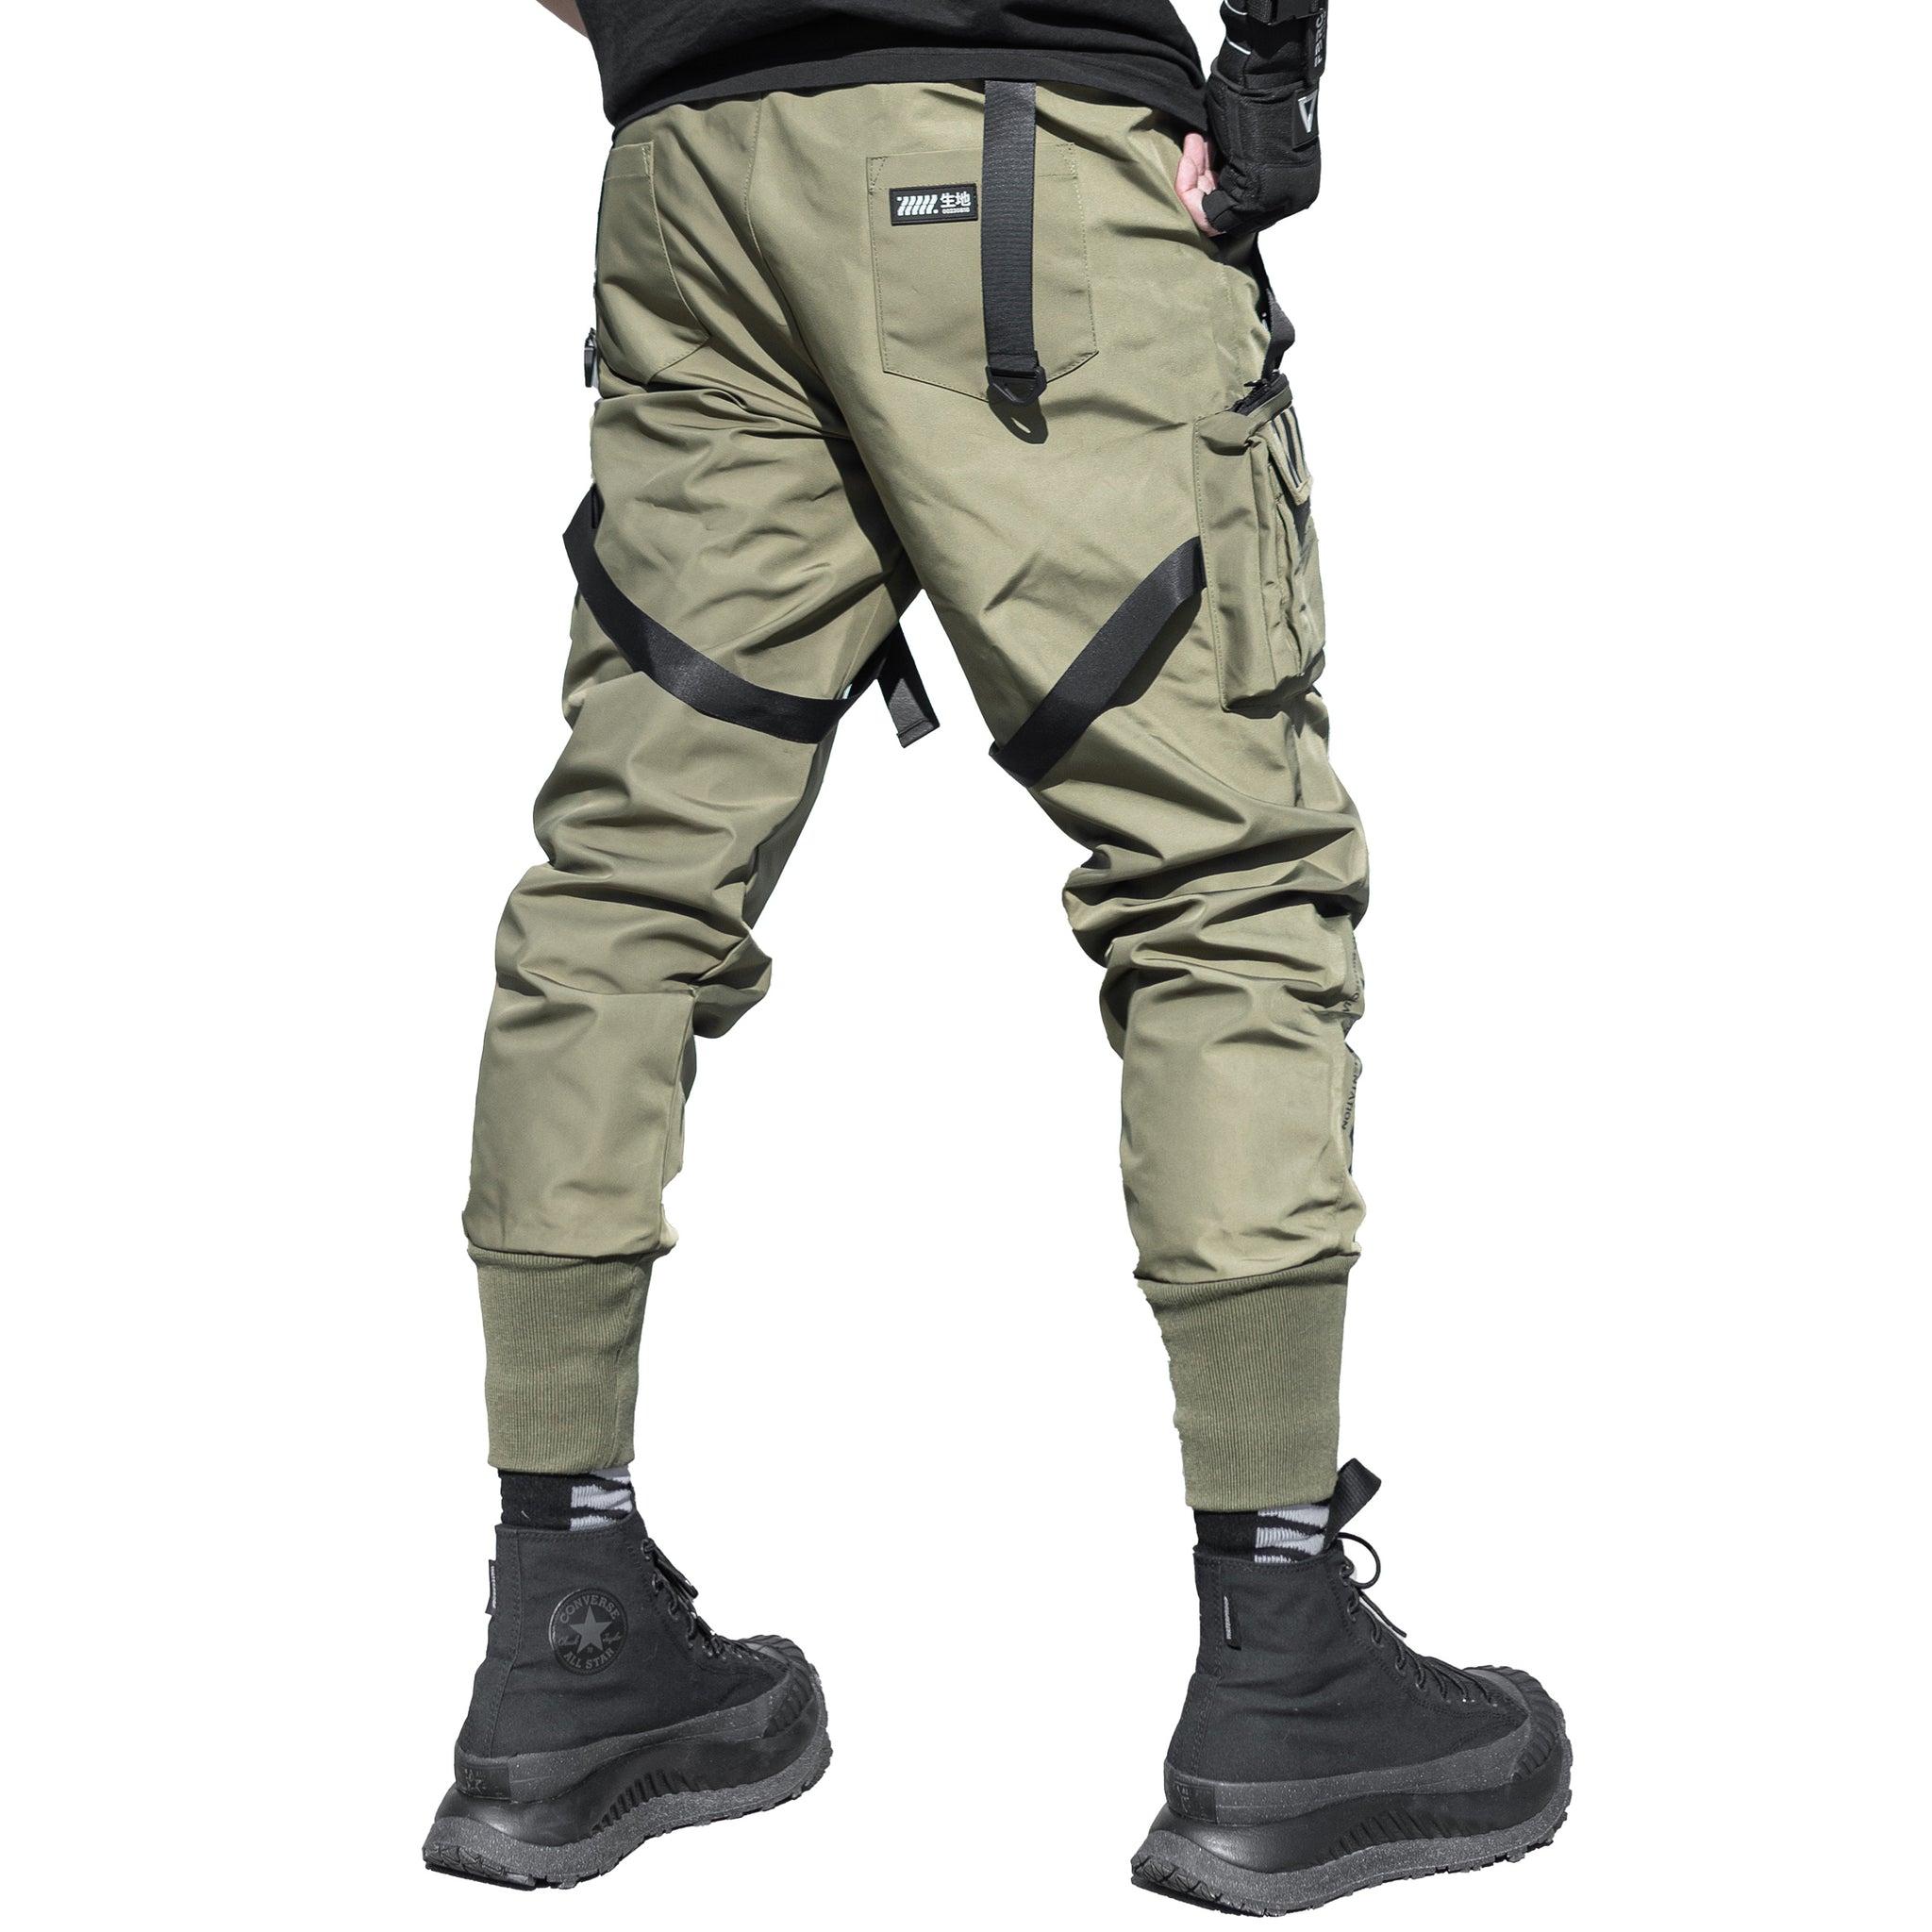 CG-Type 09S Military Green Cargo Pants - Fabric of the Universe